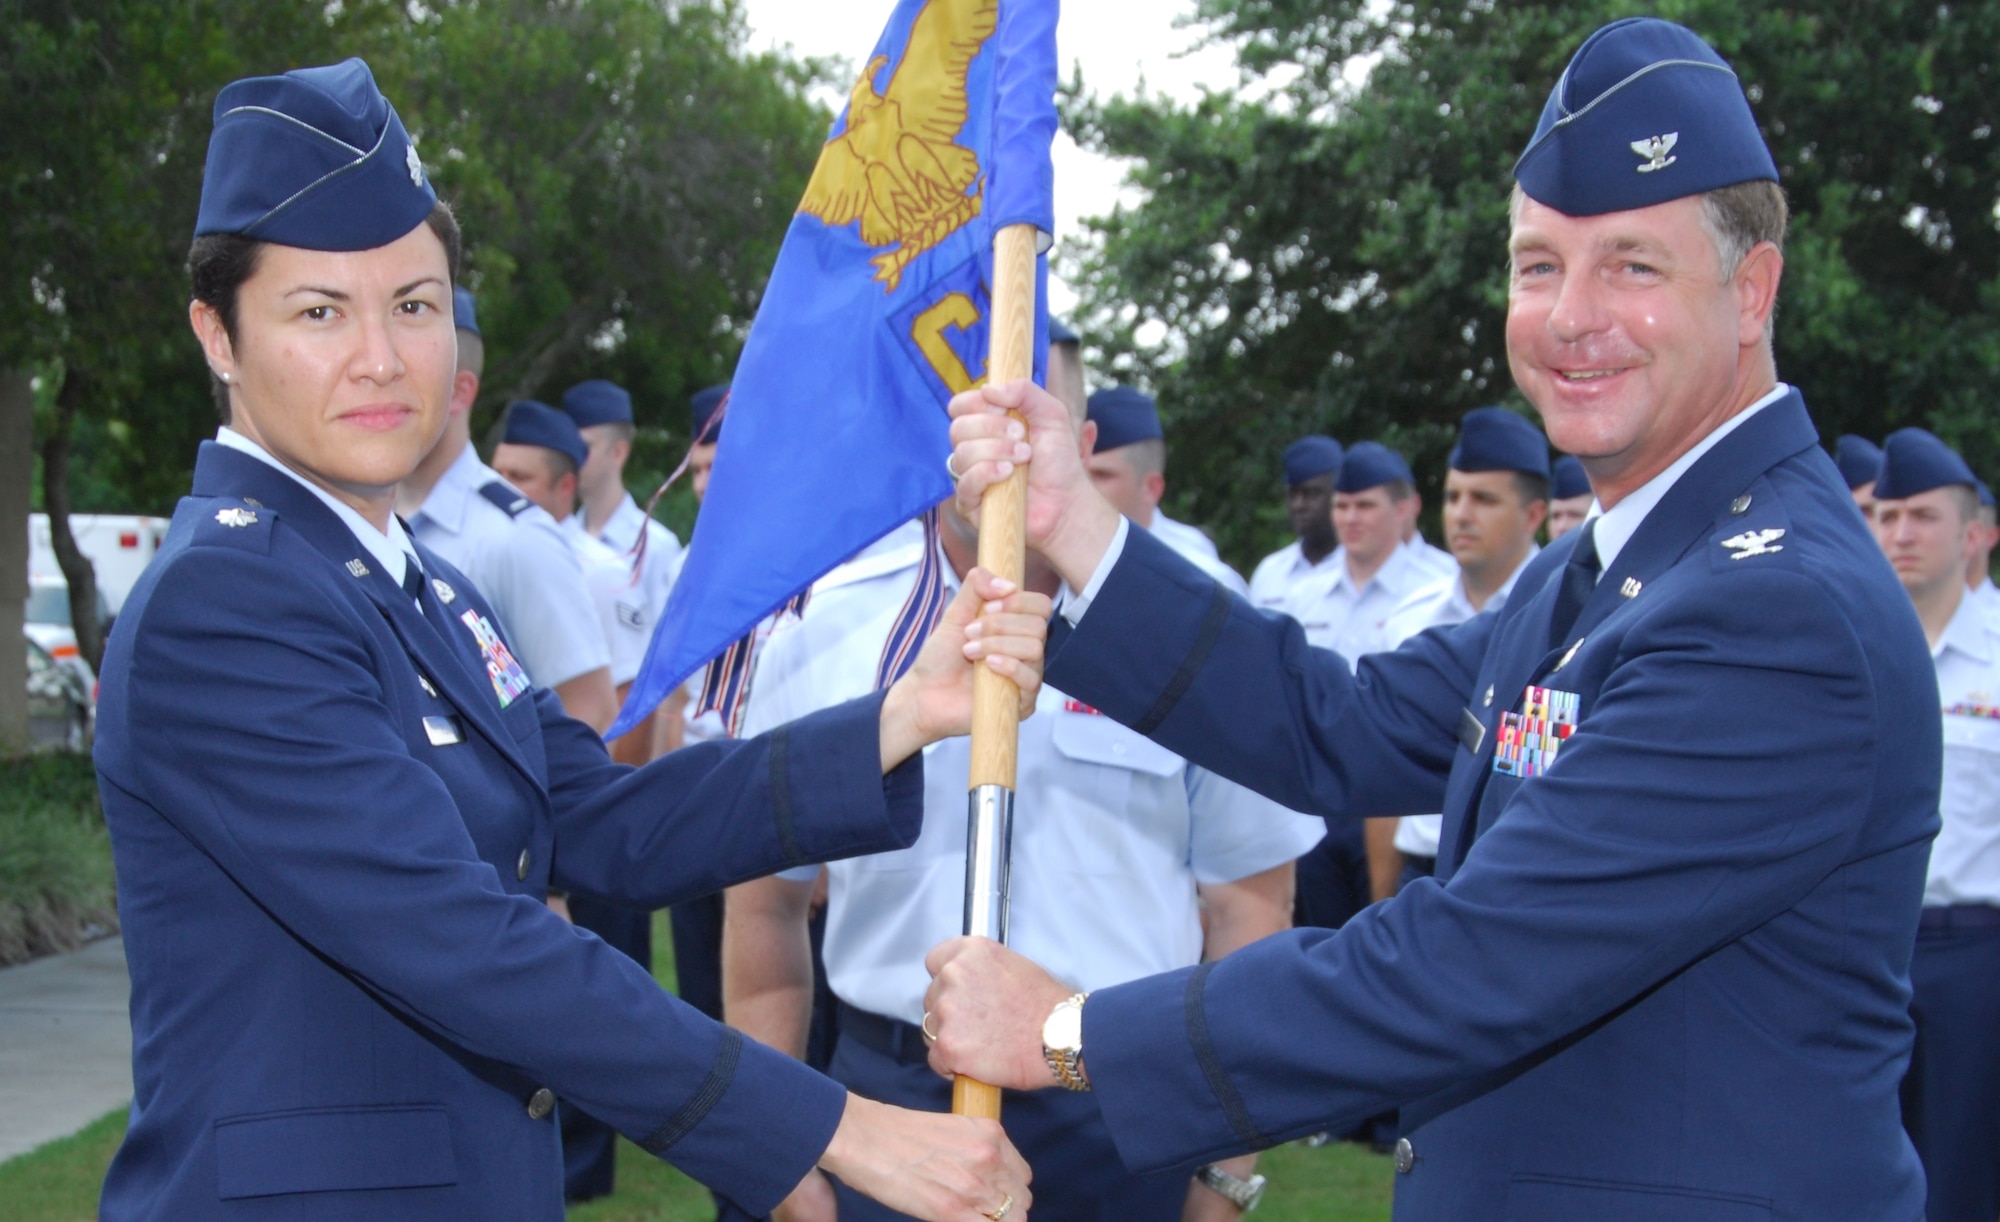 Col. David Zeh, 325th Mission Support Group commander, presents the guidon to Lt. Col. Clorinda Trujillo as she takes command of the 325th Communications Squadron.  The change of command ceremony took place June 29 in Bldg. 650.   Colonel Trujillo took over command from Maj. Jon Hannah.  (U.S. Air Force photo/Lisa Norman